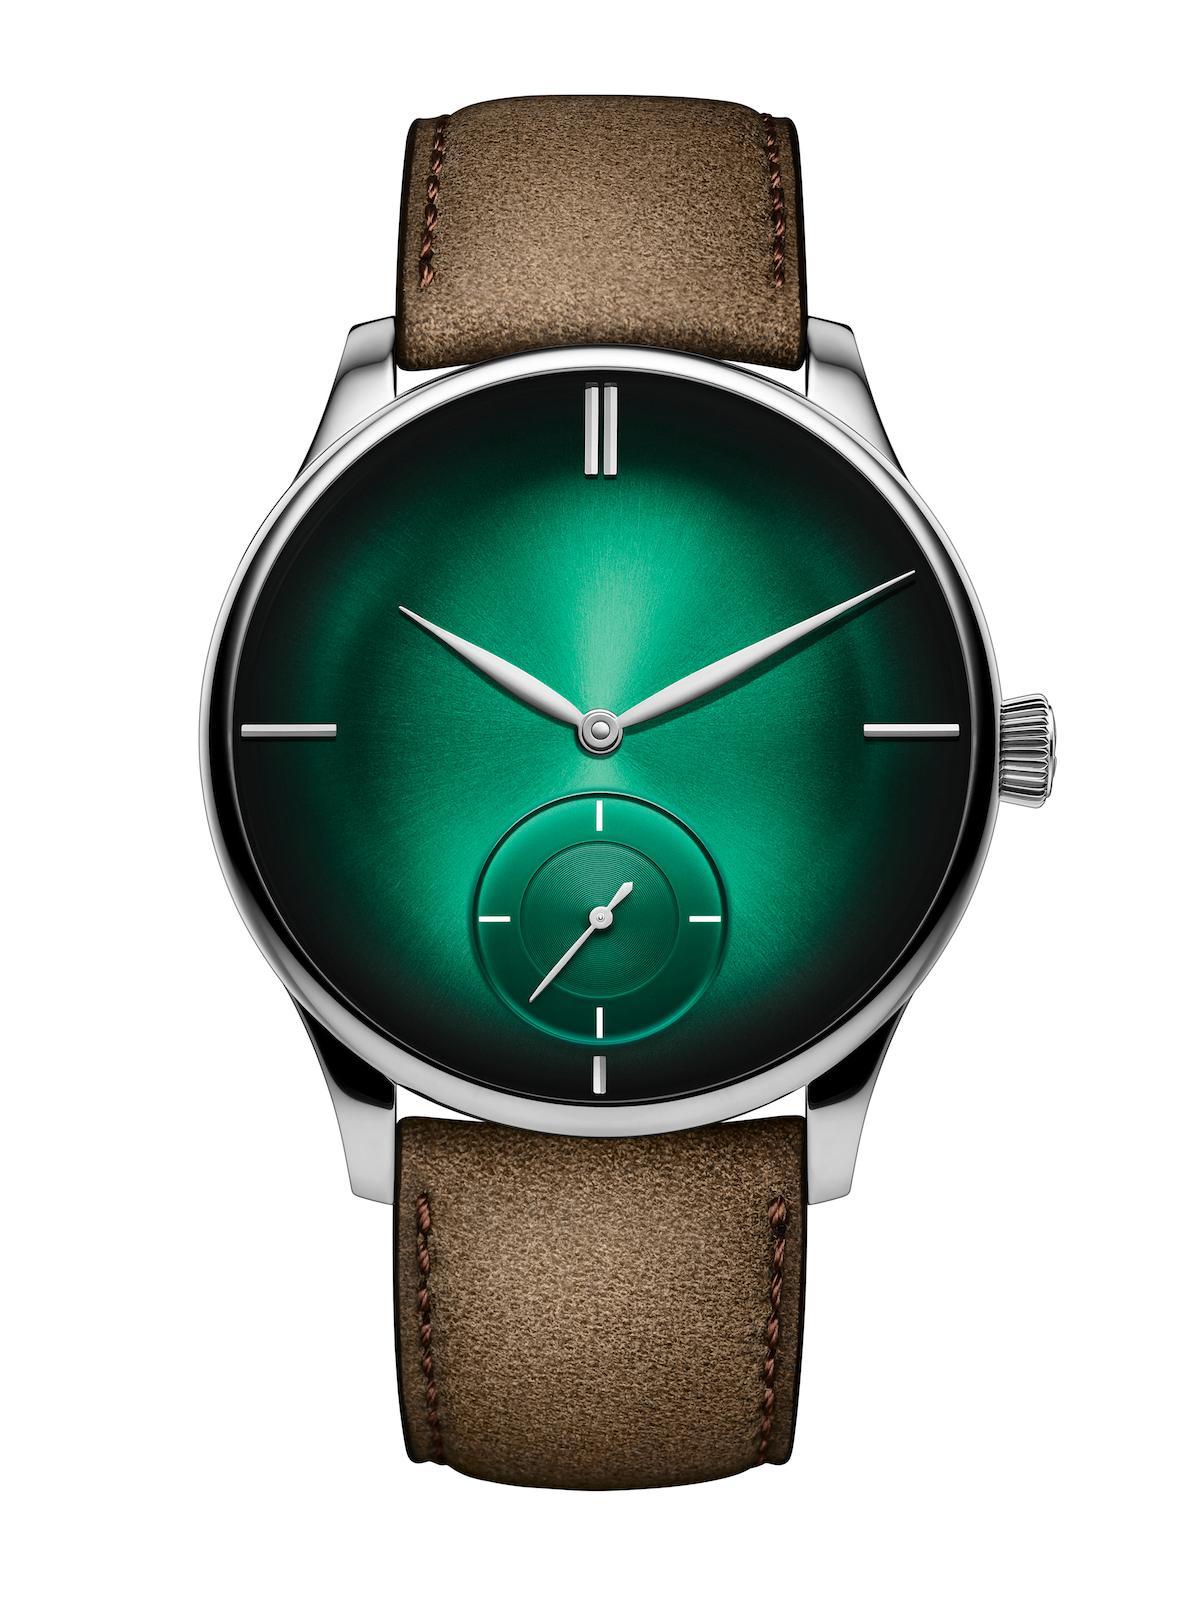 Small Green H Logo - Wearing Of The Green: H. Moser & Cie. Watch In Cosmic Green